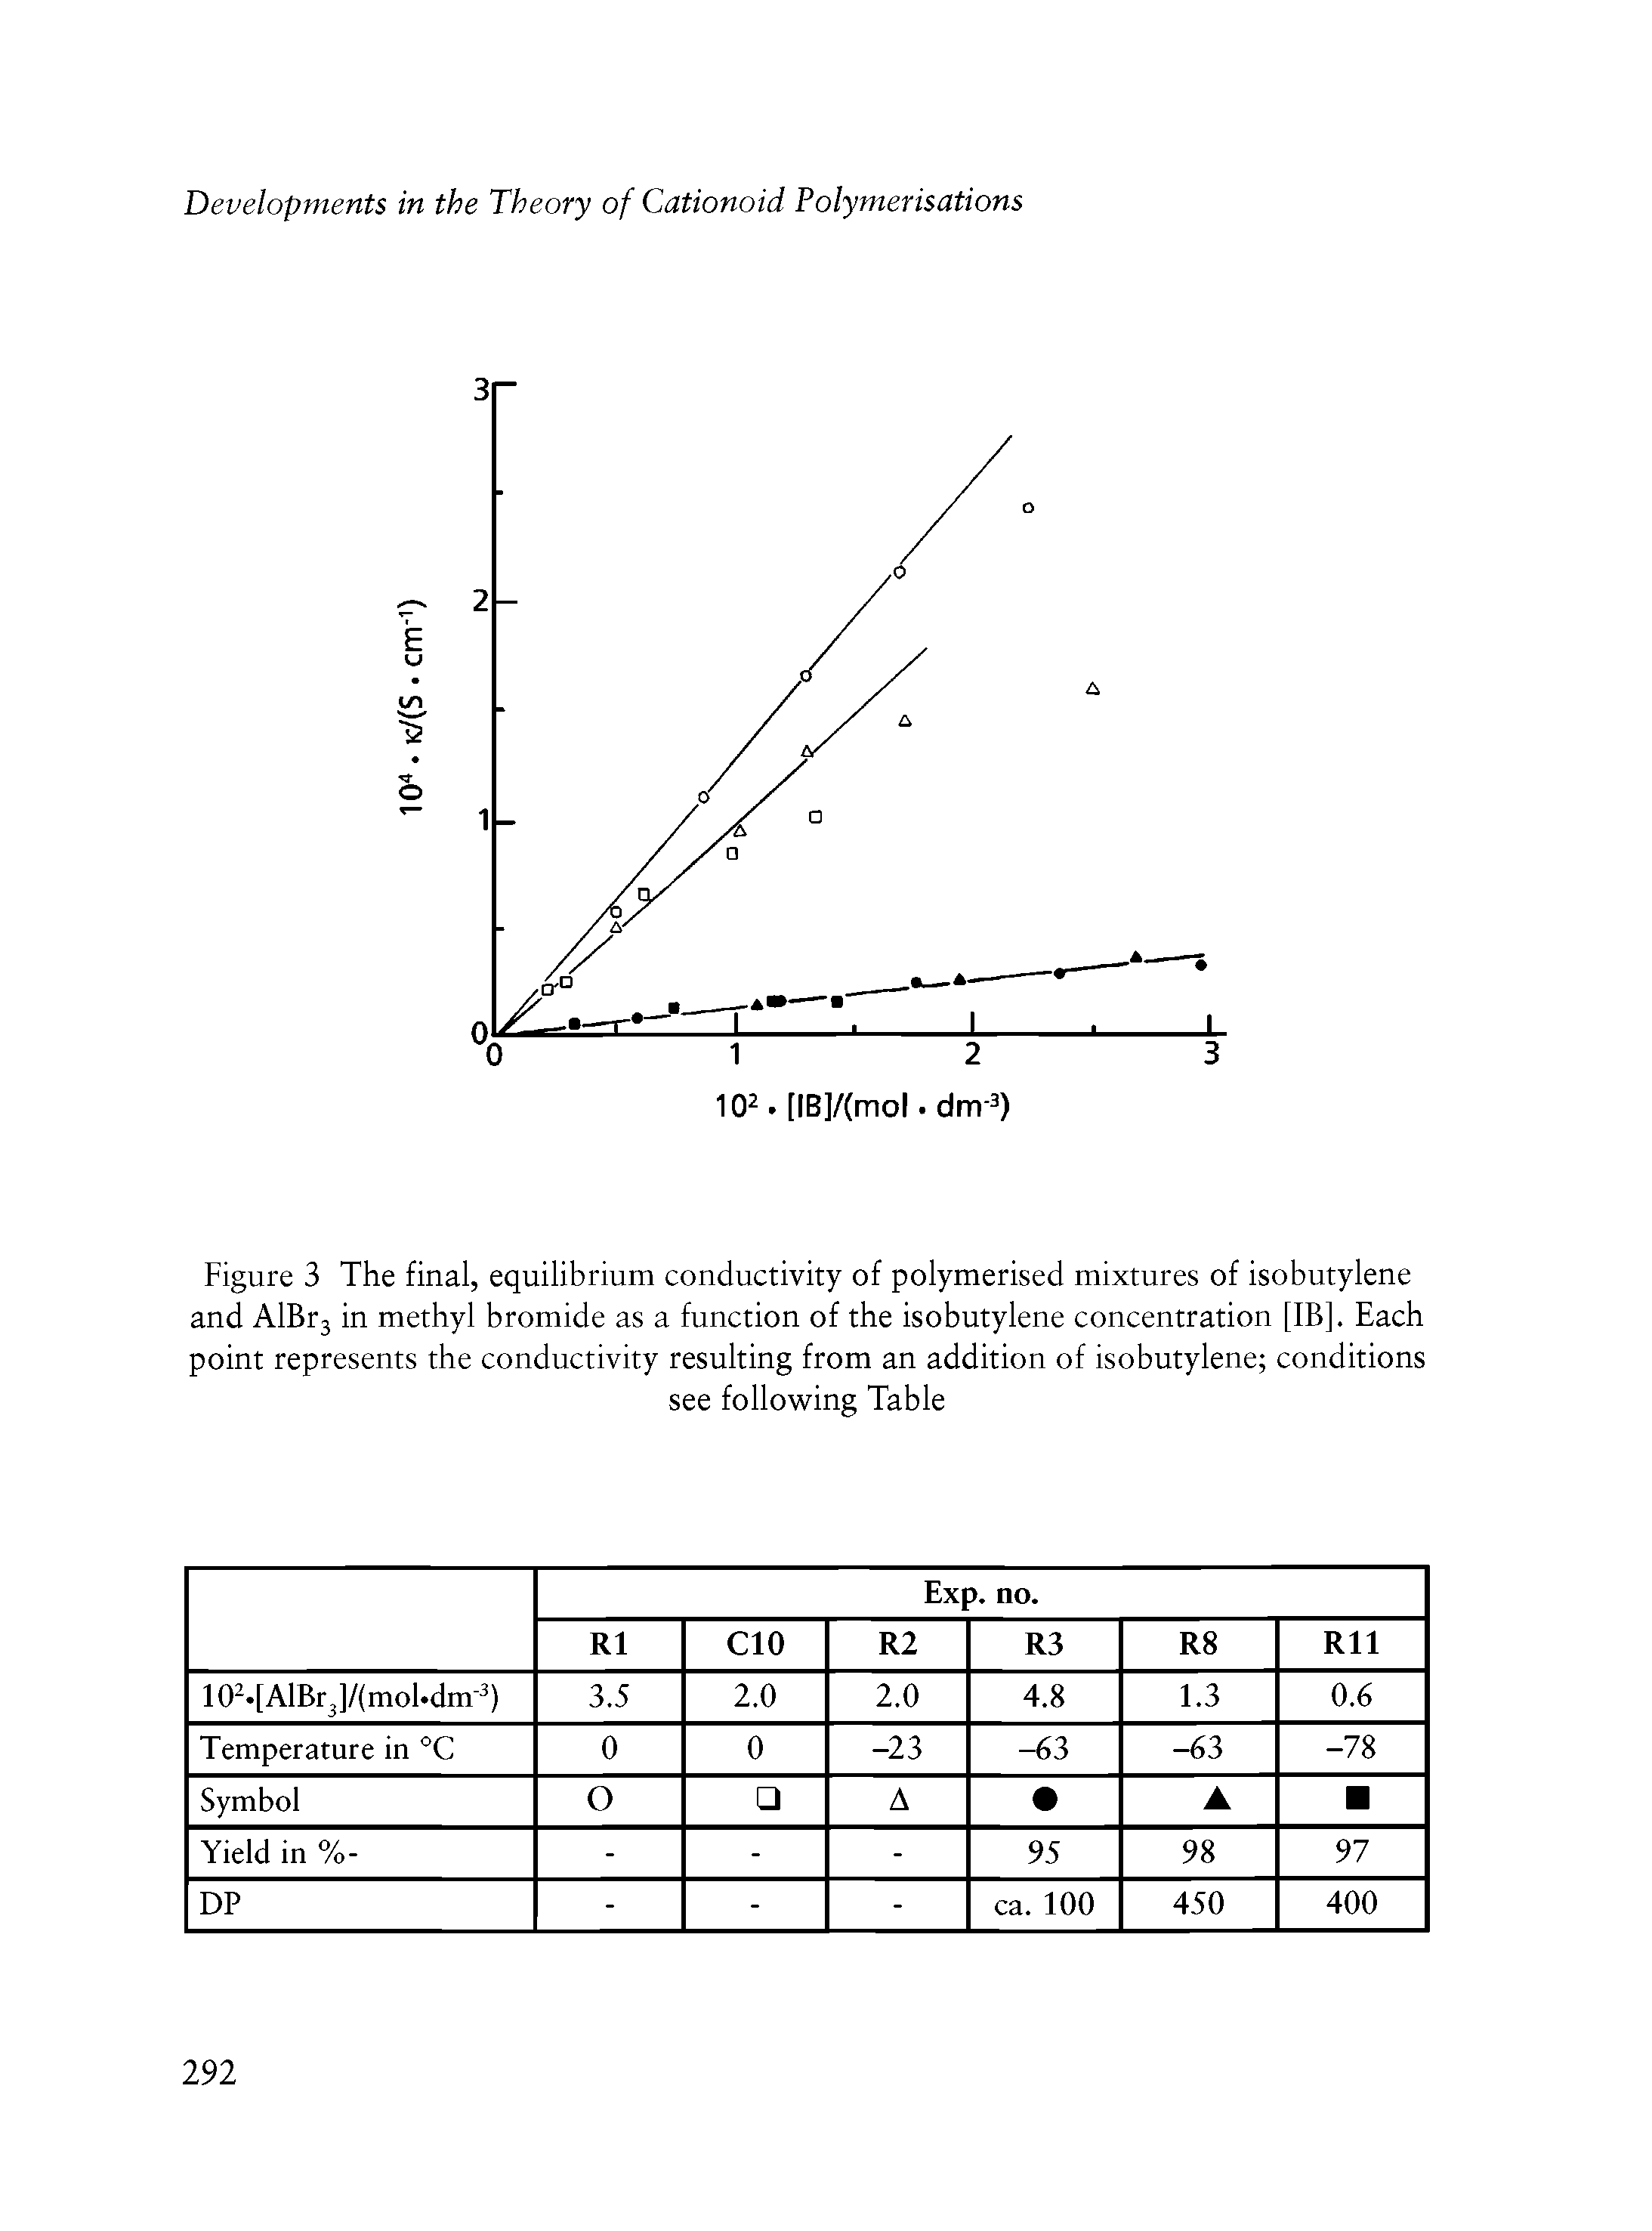 Figure 3 The final, equilibrium conductivity of polymerised mixtures of isobutylene and AlBr3 in methyl bromide as a function of the isobutylene concentration [IB]. Each point represents the conductivity resulting from an addition of isobutylene conditions...